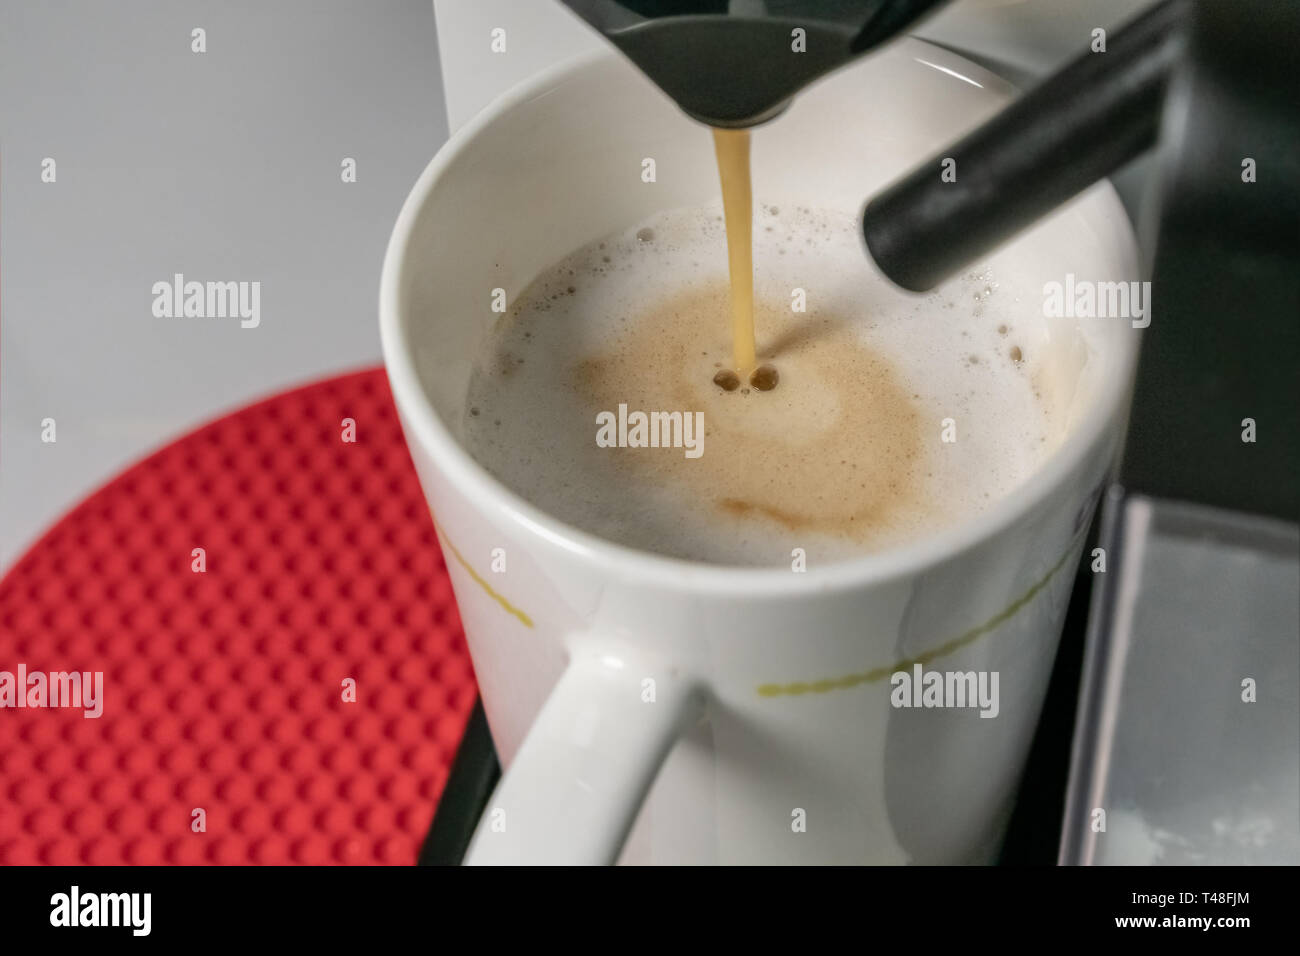 Making cappuccino - close up view of espresso pouring from coffee machine. Cuppuccino has the main ingredients are Espresso and milk. Blurred Stock Photo